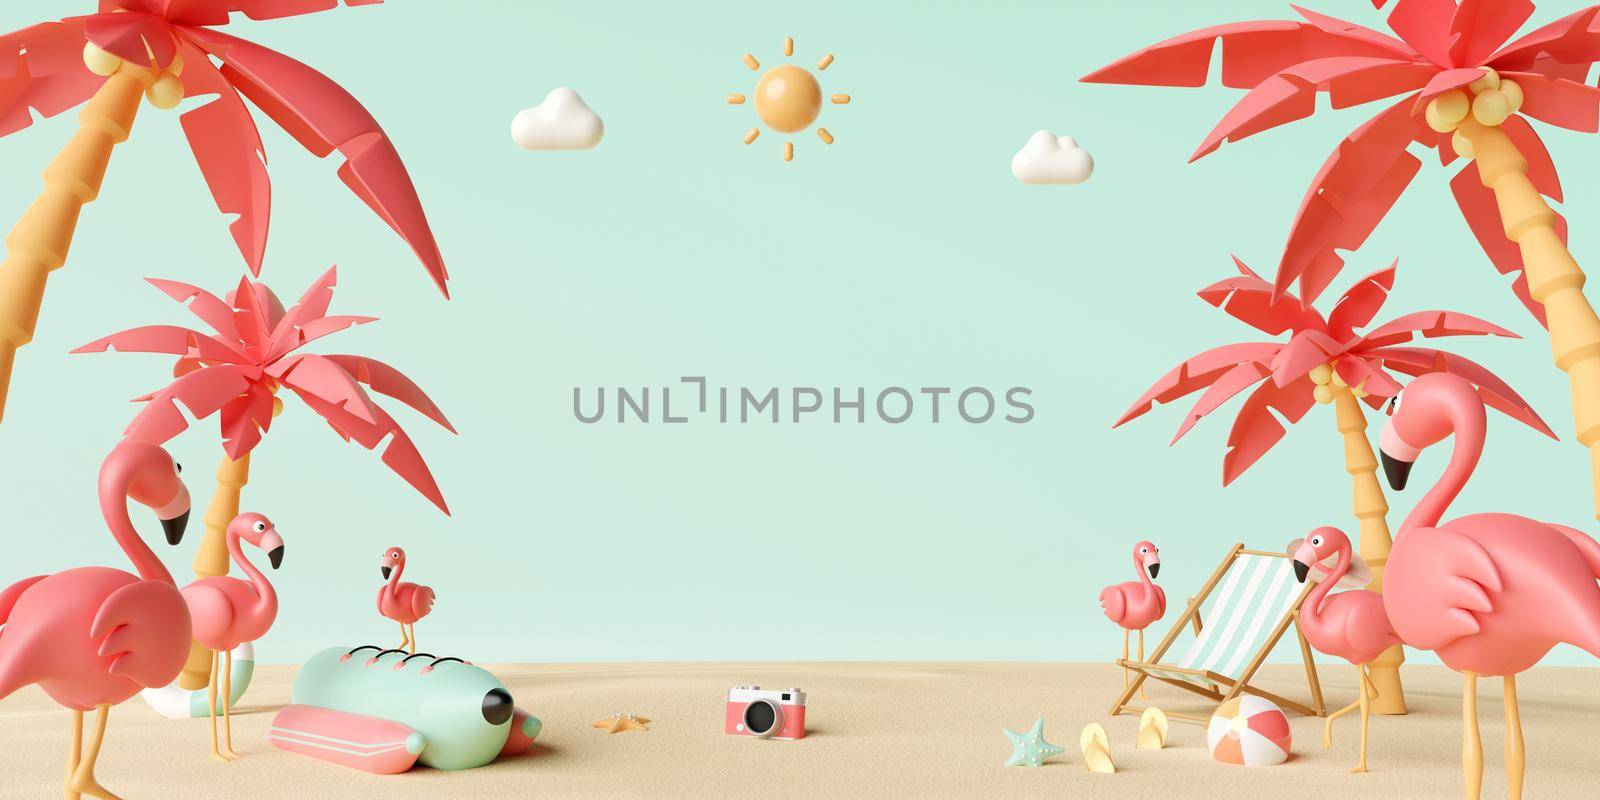 Summer vacation concept, Flamingo, beach chairs and accessories under palm tree with copy space for text advertisement, 3d illustration by nutzchotwarut